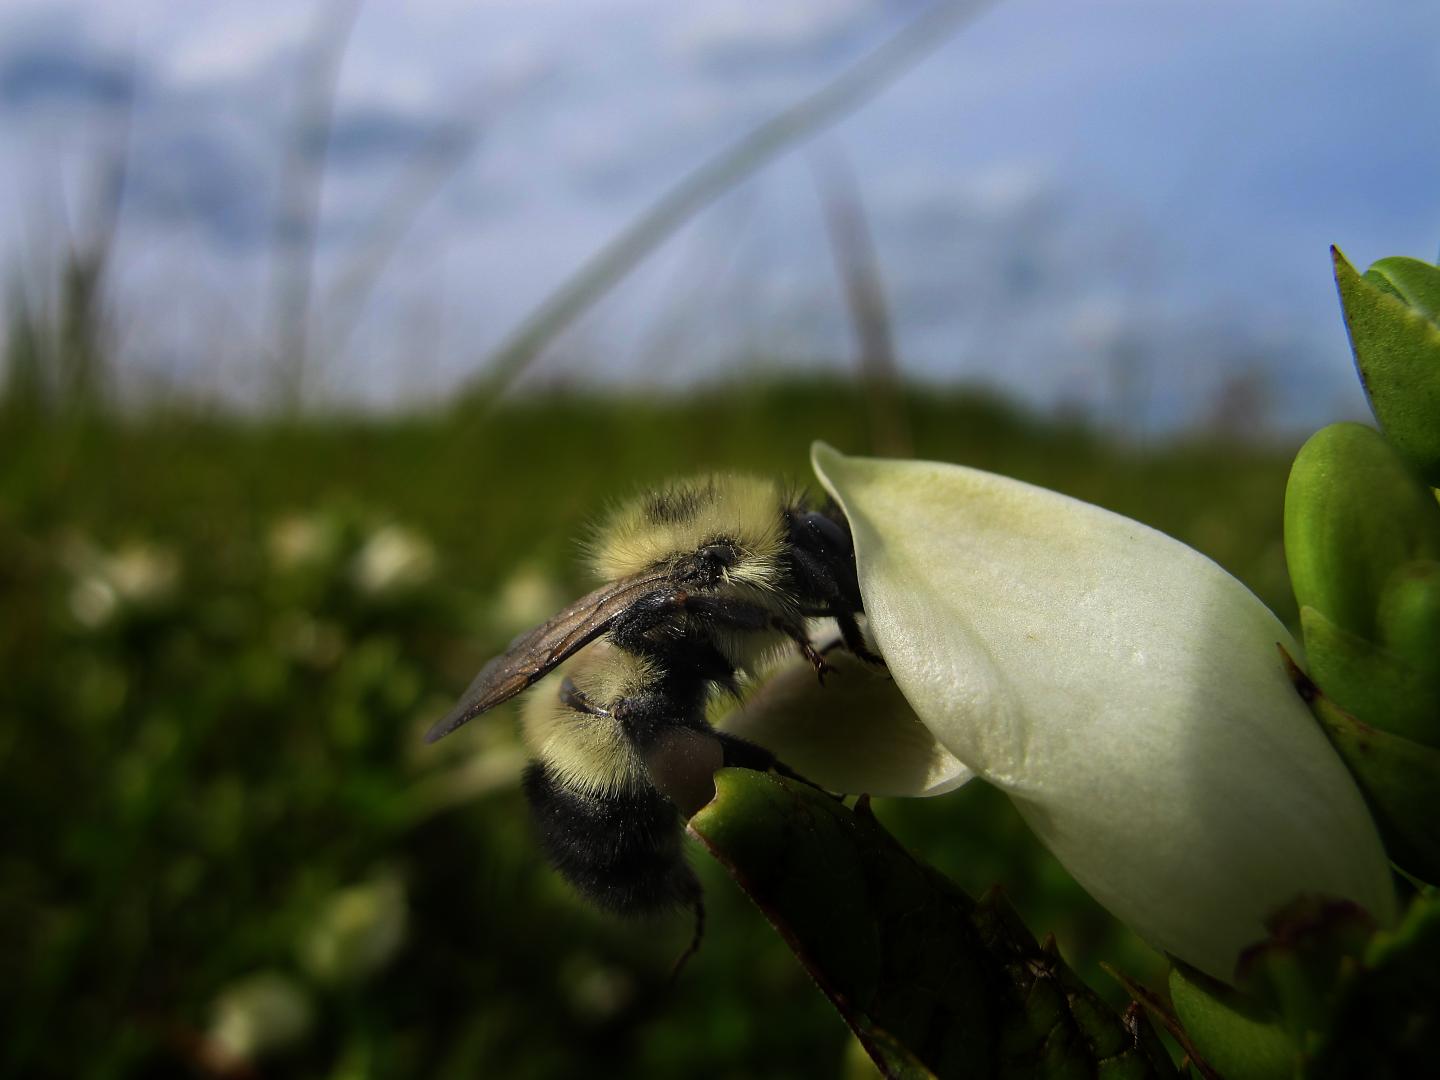 CATCH THE BUZZ – Parasitized Bees are Self-Medicating In The Wild, Dartmouth-Led Study Finds